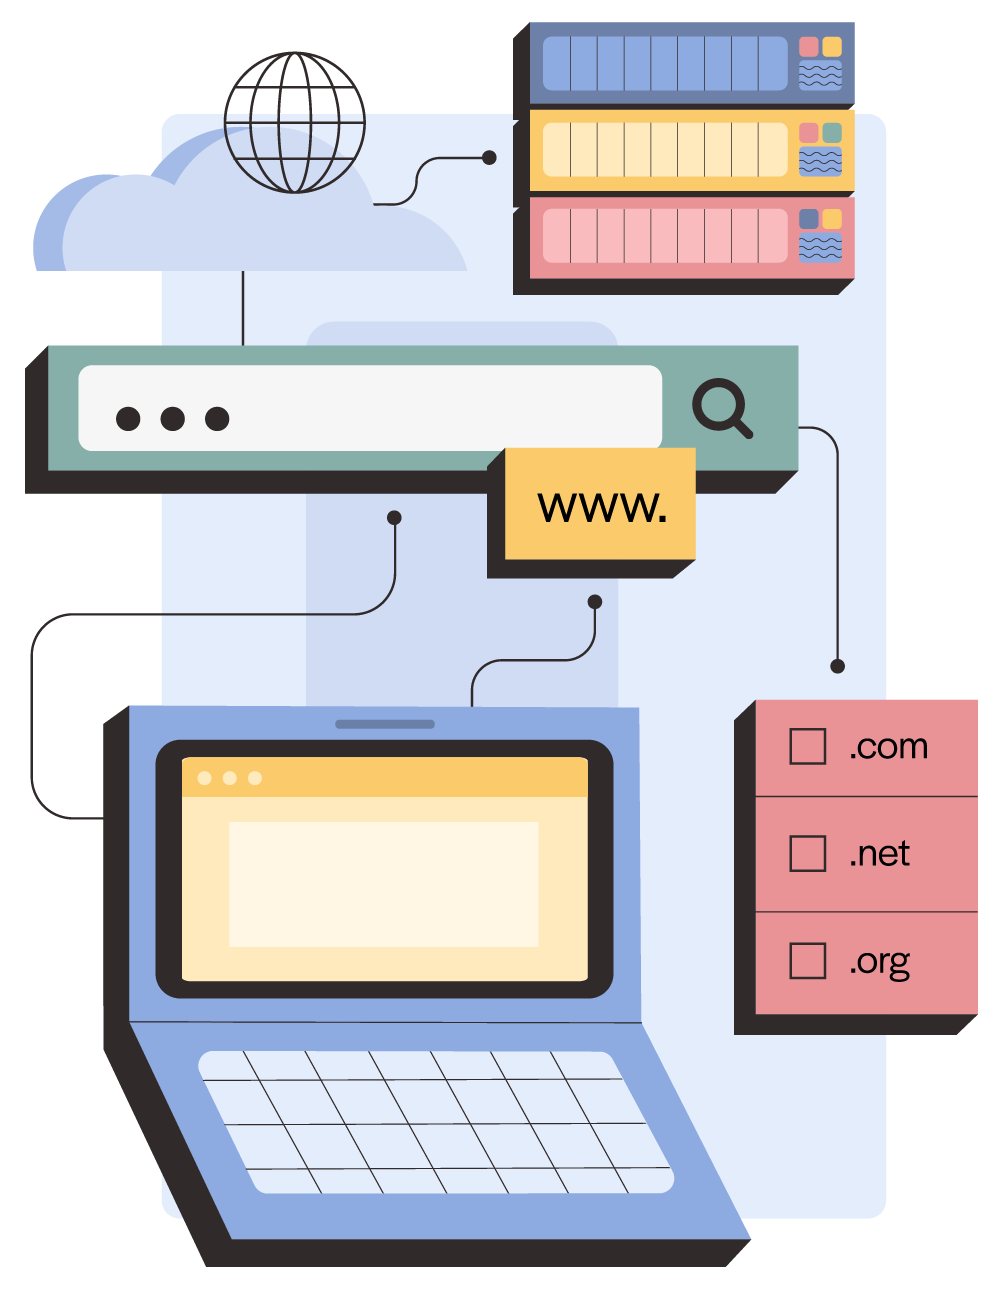 Diagram showing relationship between domain name, IP address, and laptop